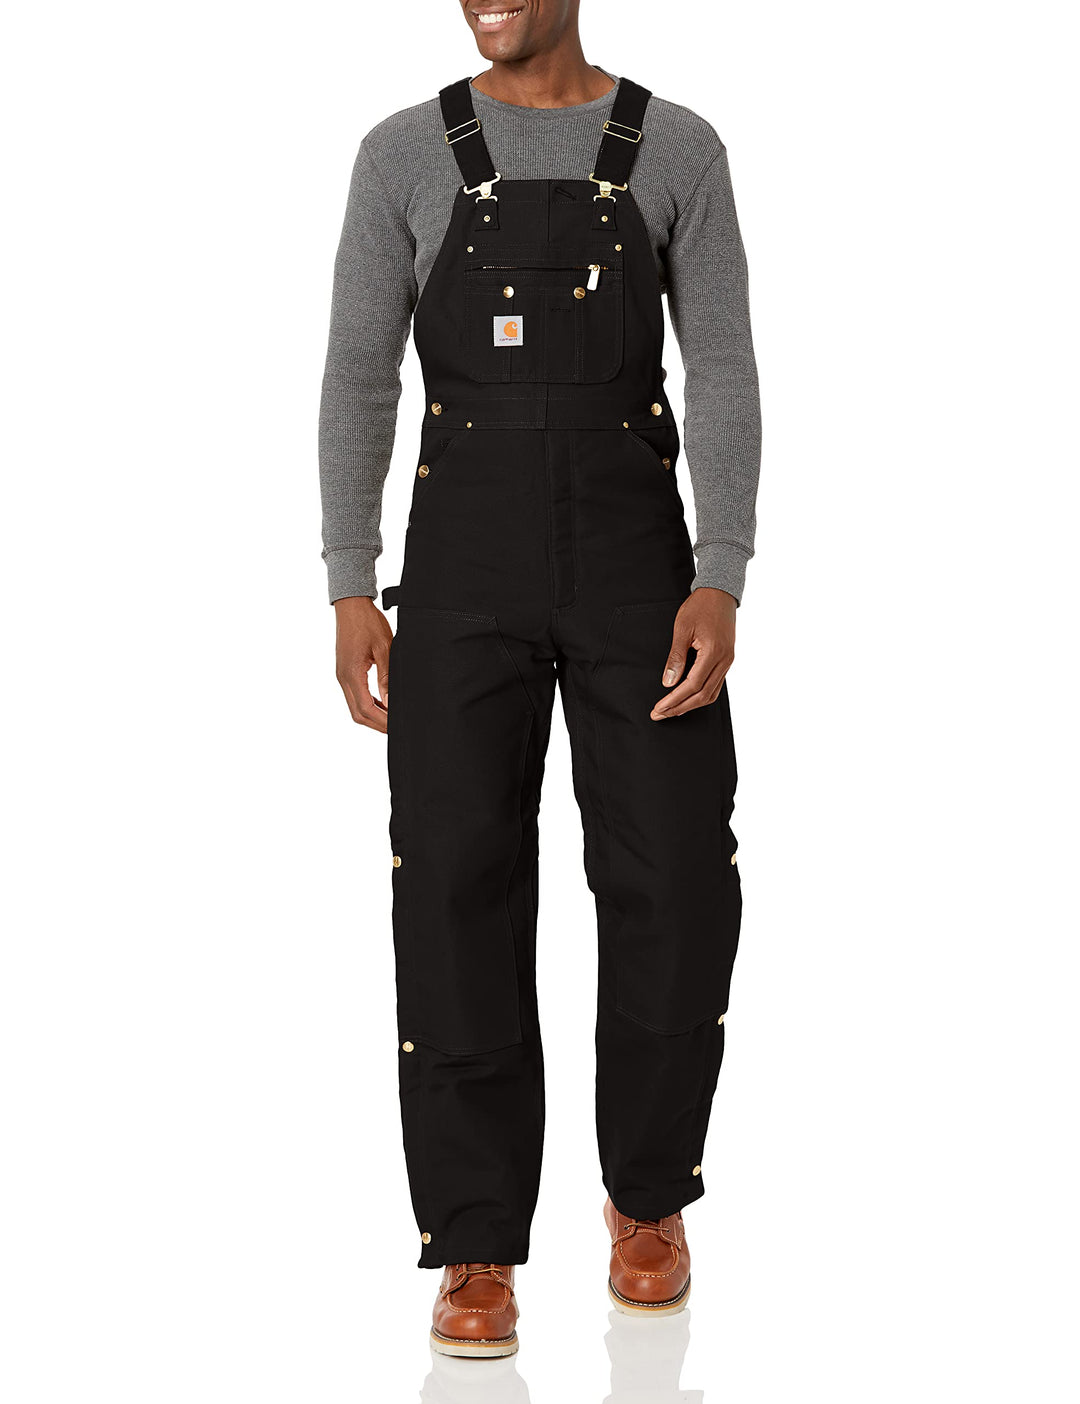 Carhartt mens Quilt Lined Zip to Thigh Bib overalls and coveralls workwear apparel, Black, 38W x 32L US